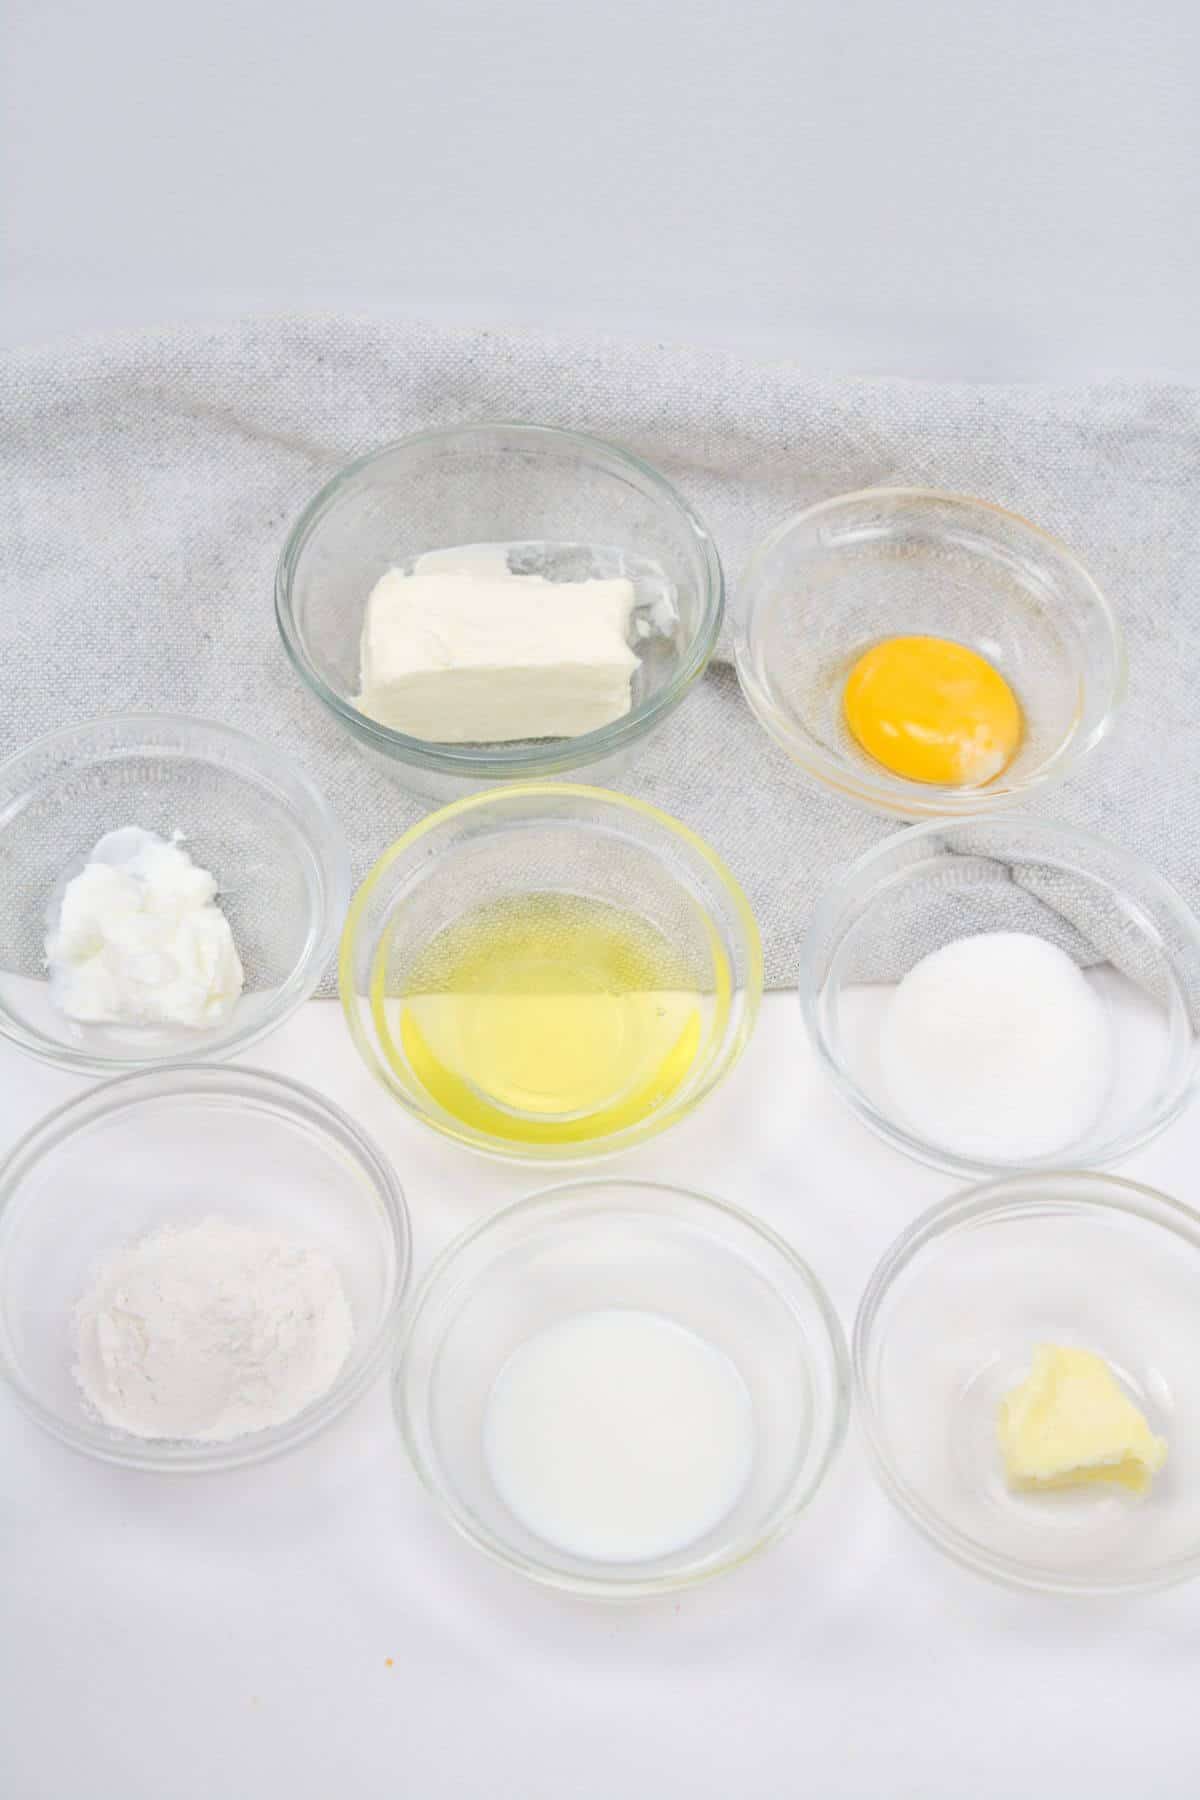 Souffle cheesecake ingredients.